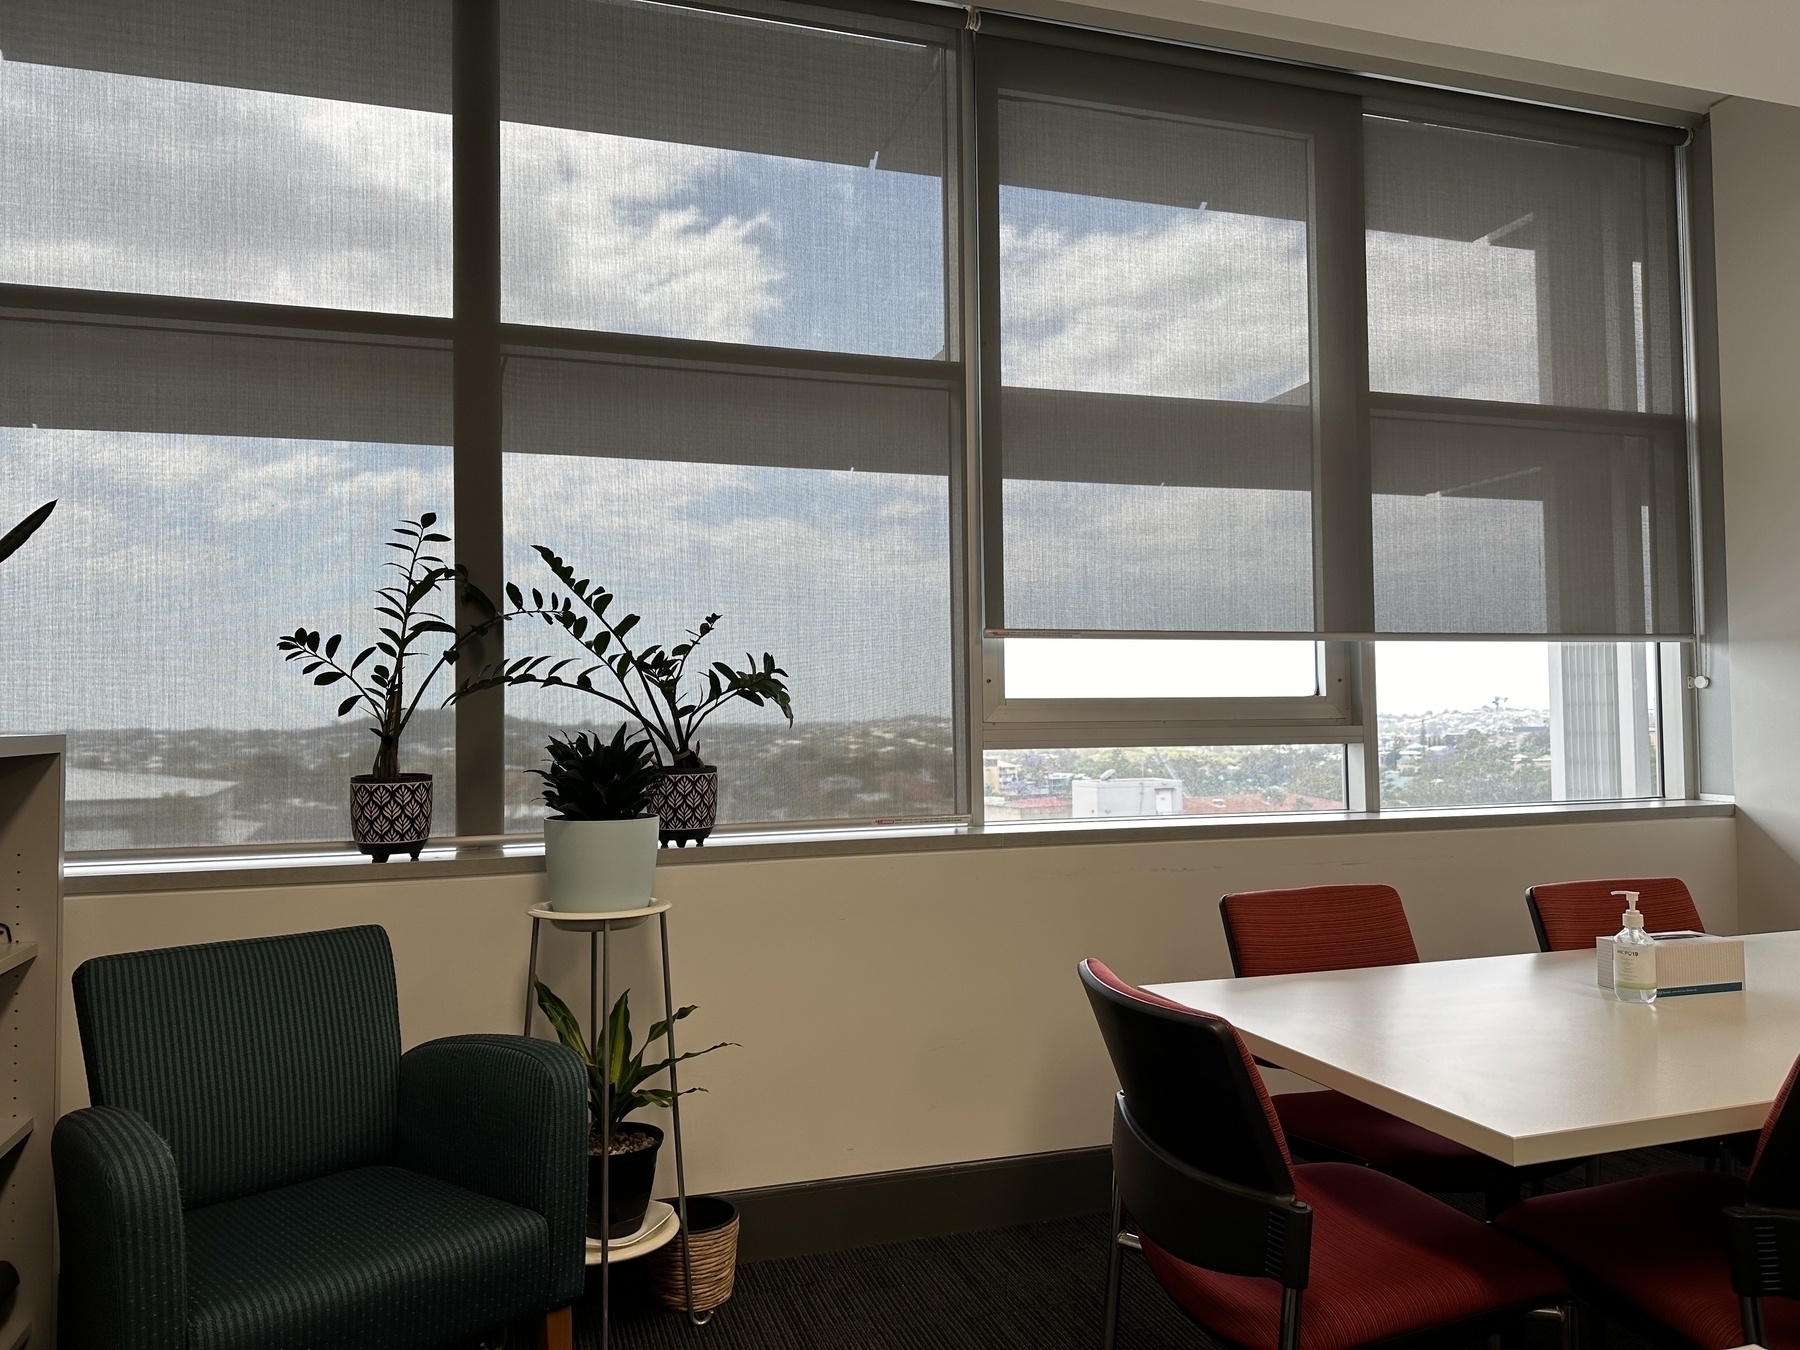 Looking across an office towards windows with roller blinds partially down. A white meeting table with red chairs to the right. A green chair with plants near it on the left. 